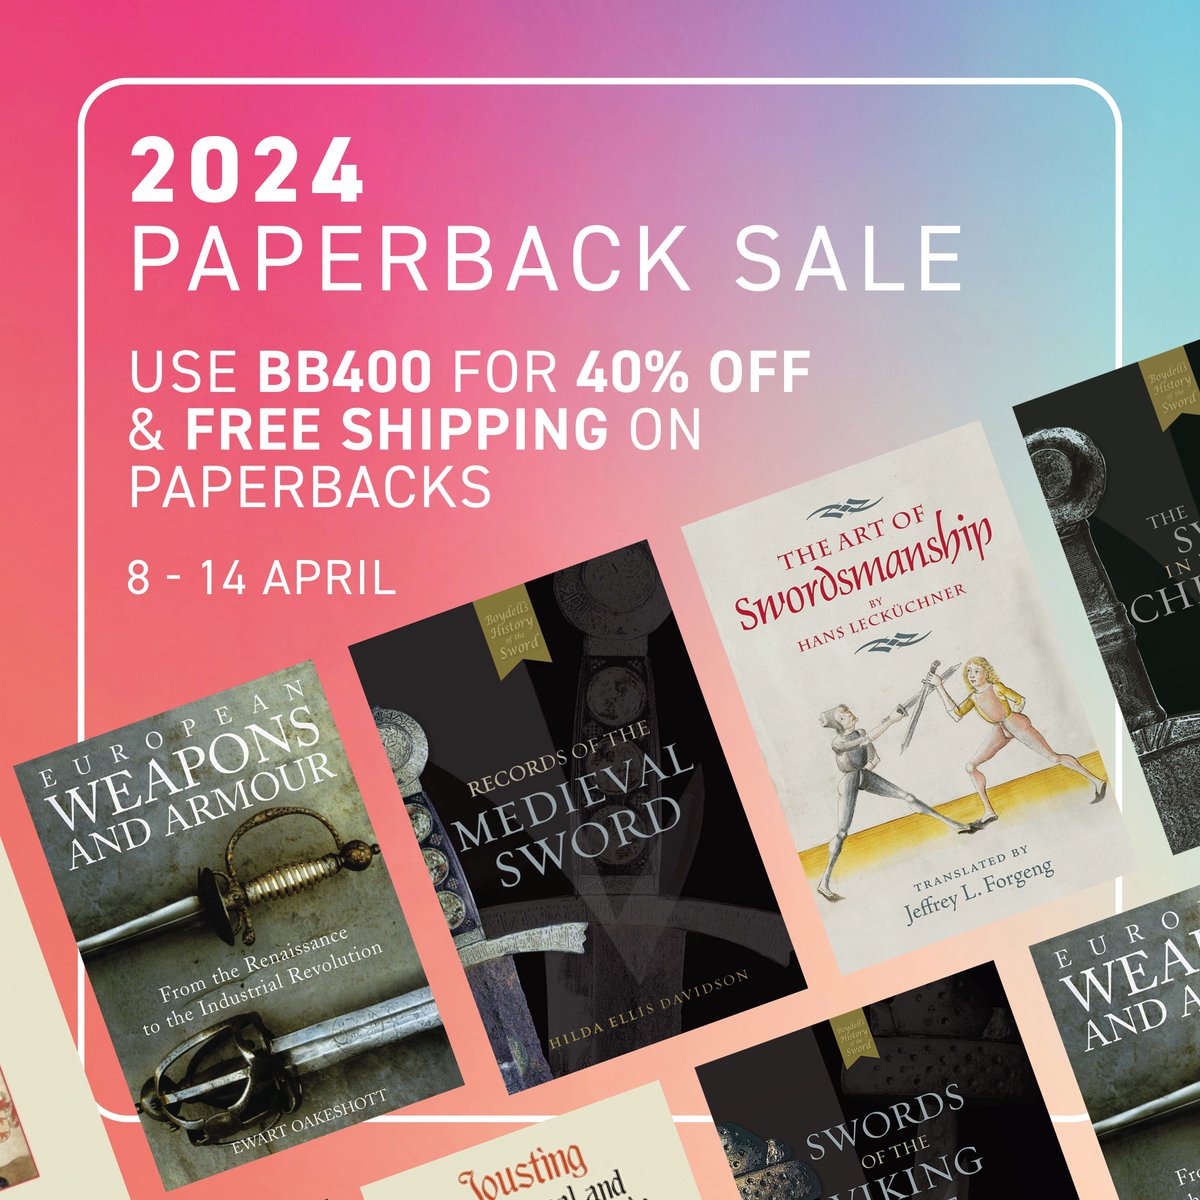 Dozens of #MilitaryHistory titles are part of our paperback sale, now on until 14 April. 40% off and FREE SHIPPING: buff.ly/3vpTP13 #SwordTwitter #Chivalry